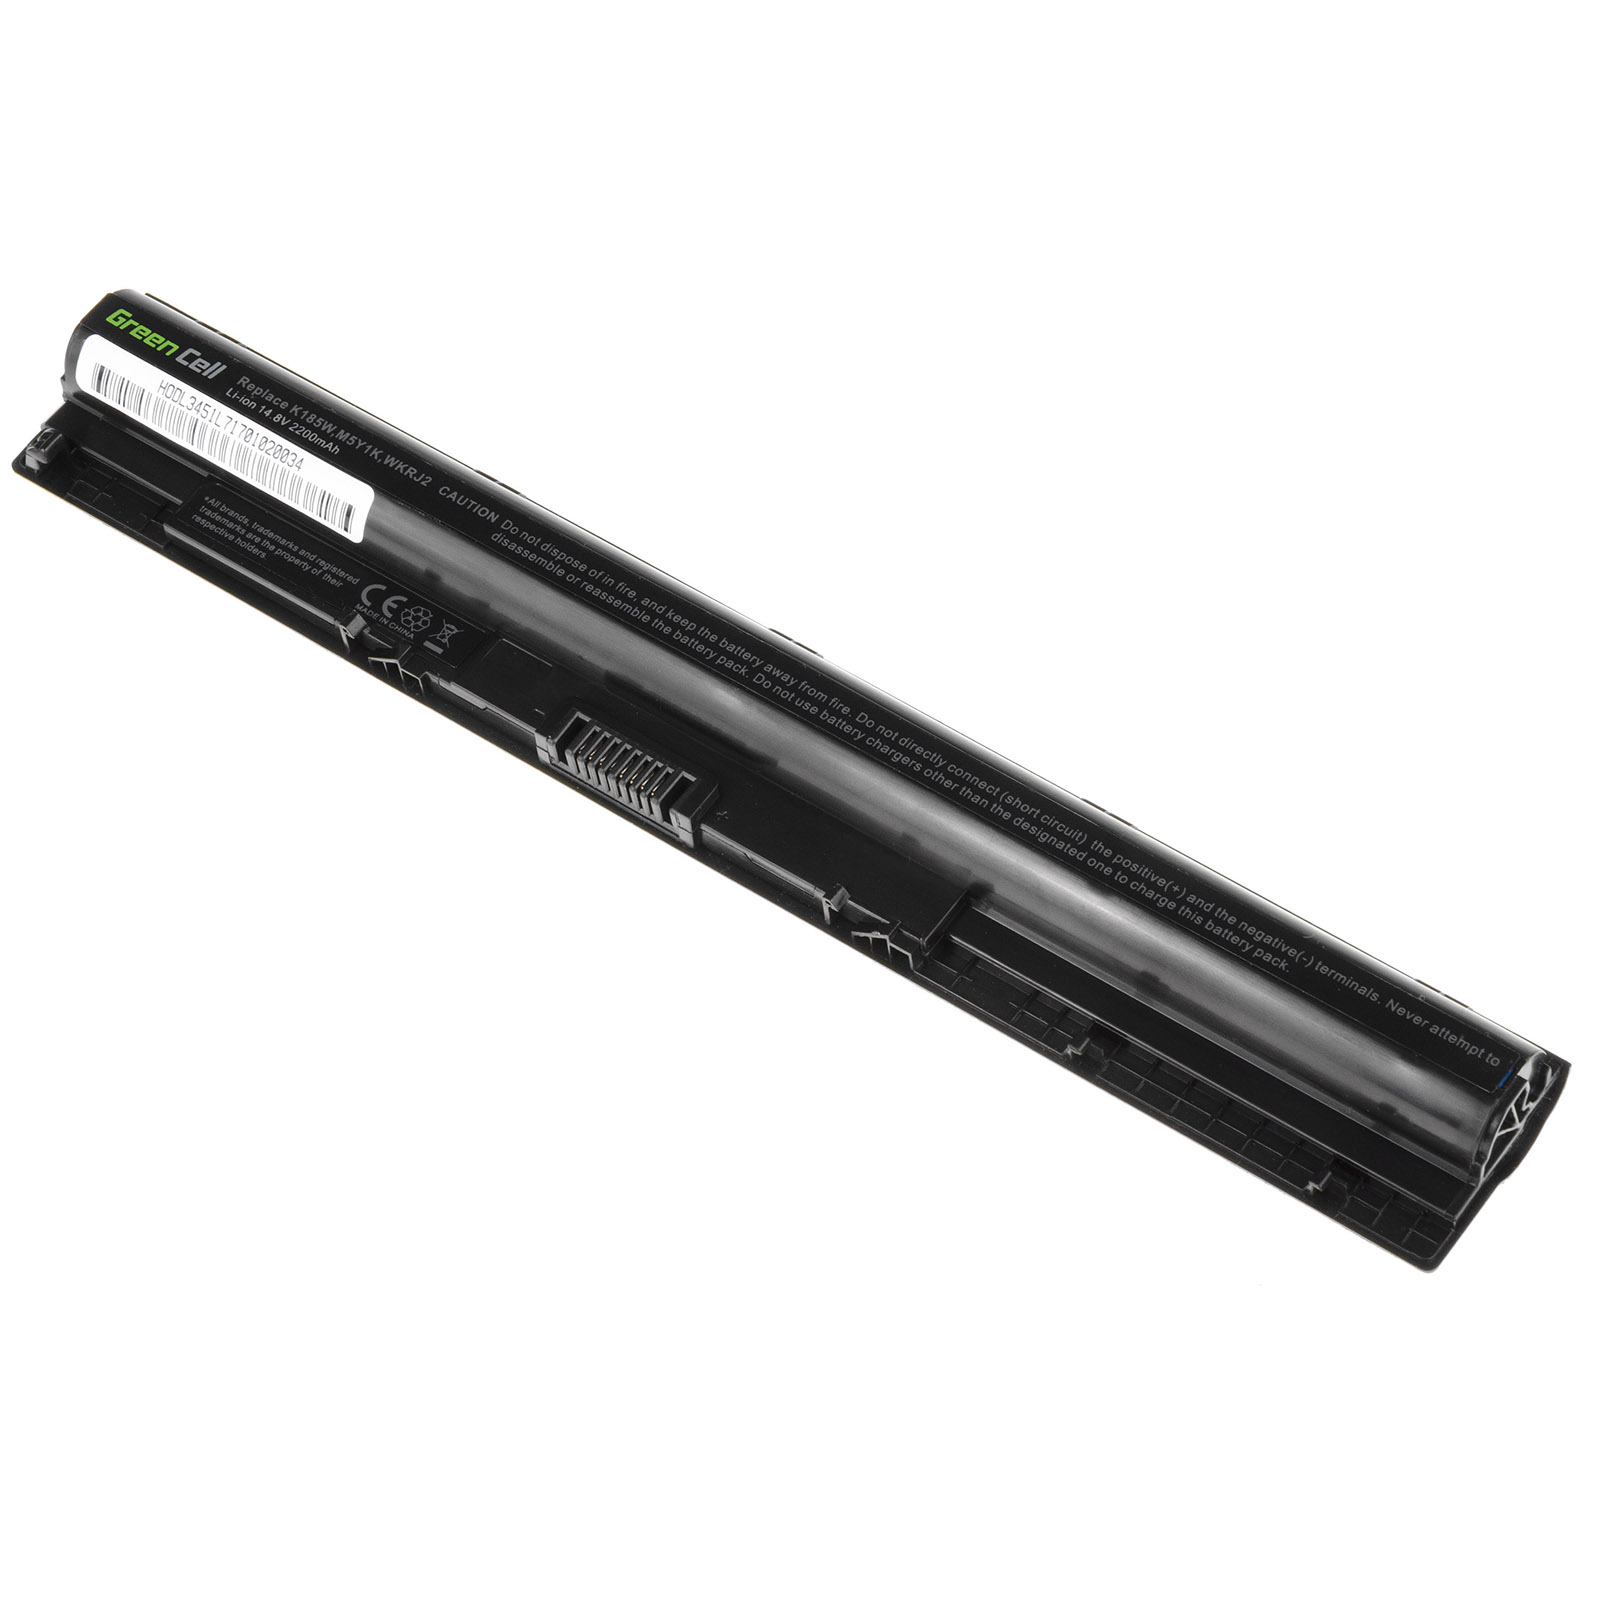 M5Y1K DELL Inspiron 3451 3551 3458 3558 07G07 compatible battery